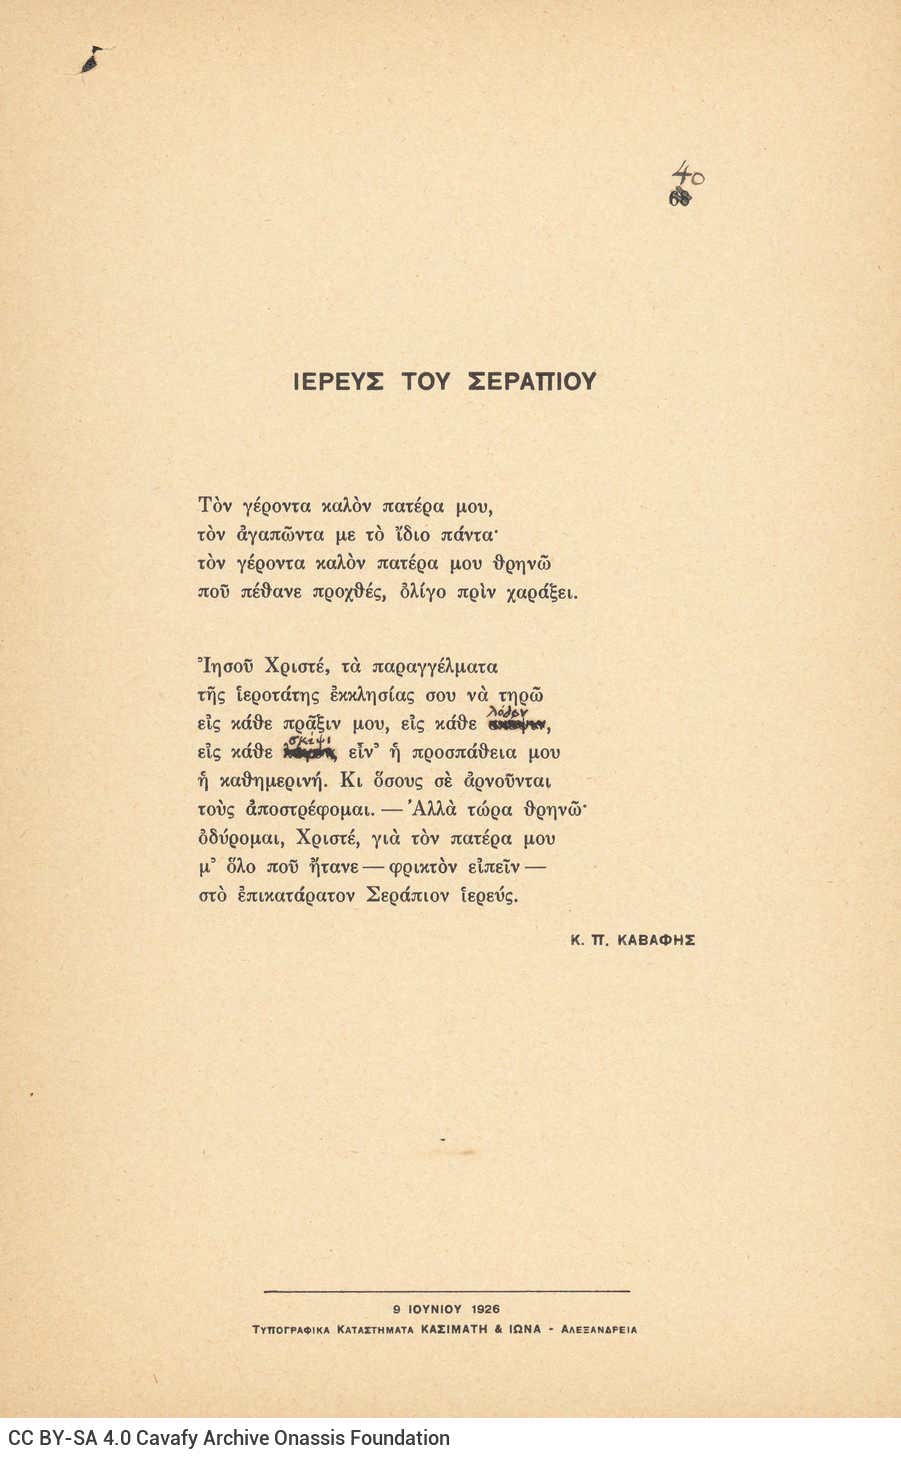 Collection of poems by Cavafy (Γ9), comprising 71 printed broadsheets which contain 60 poems. The collection is enclosed in 